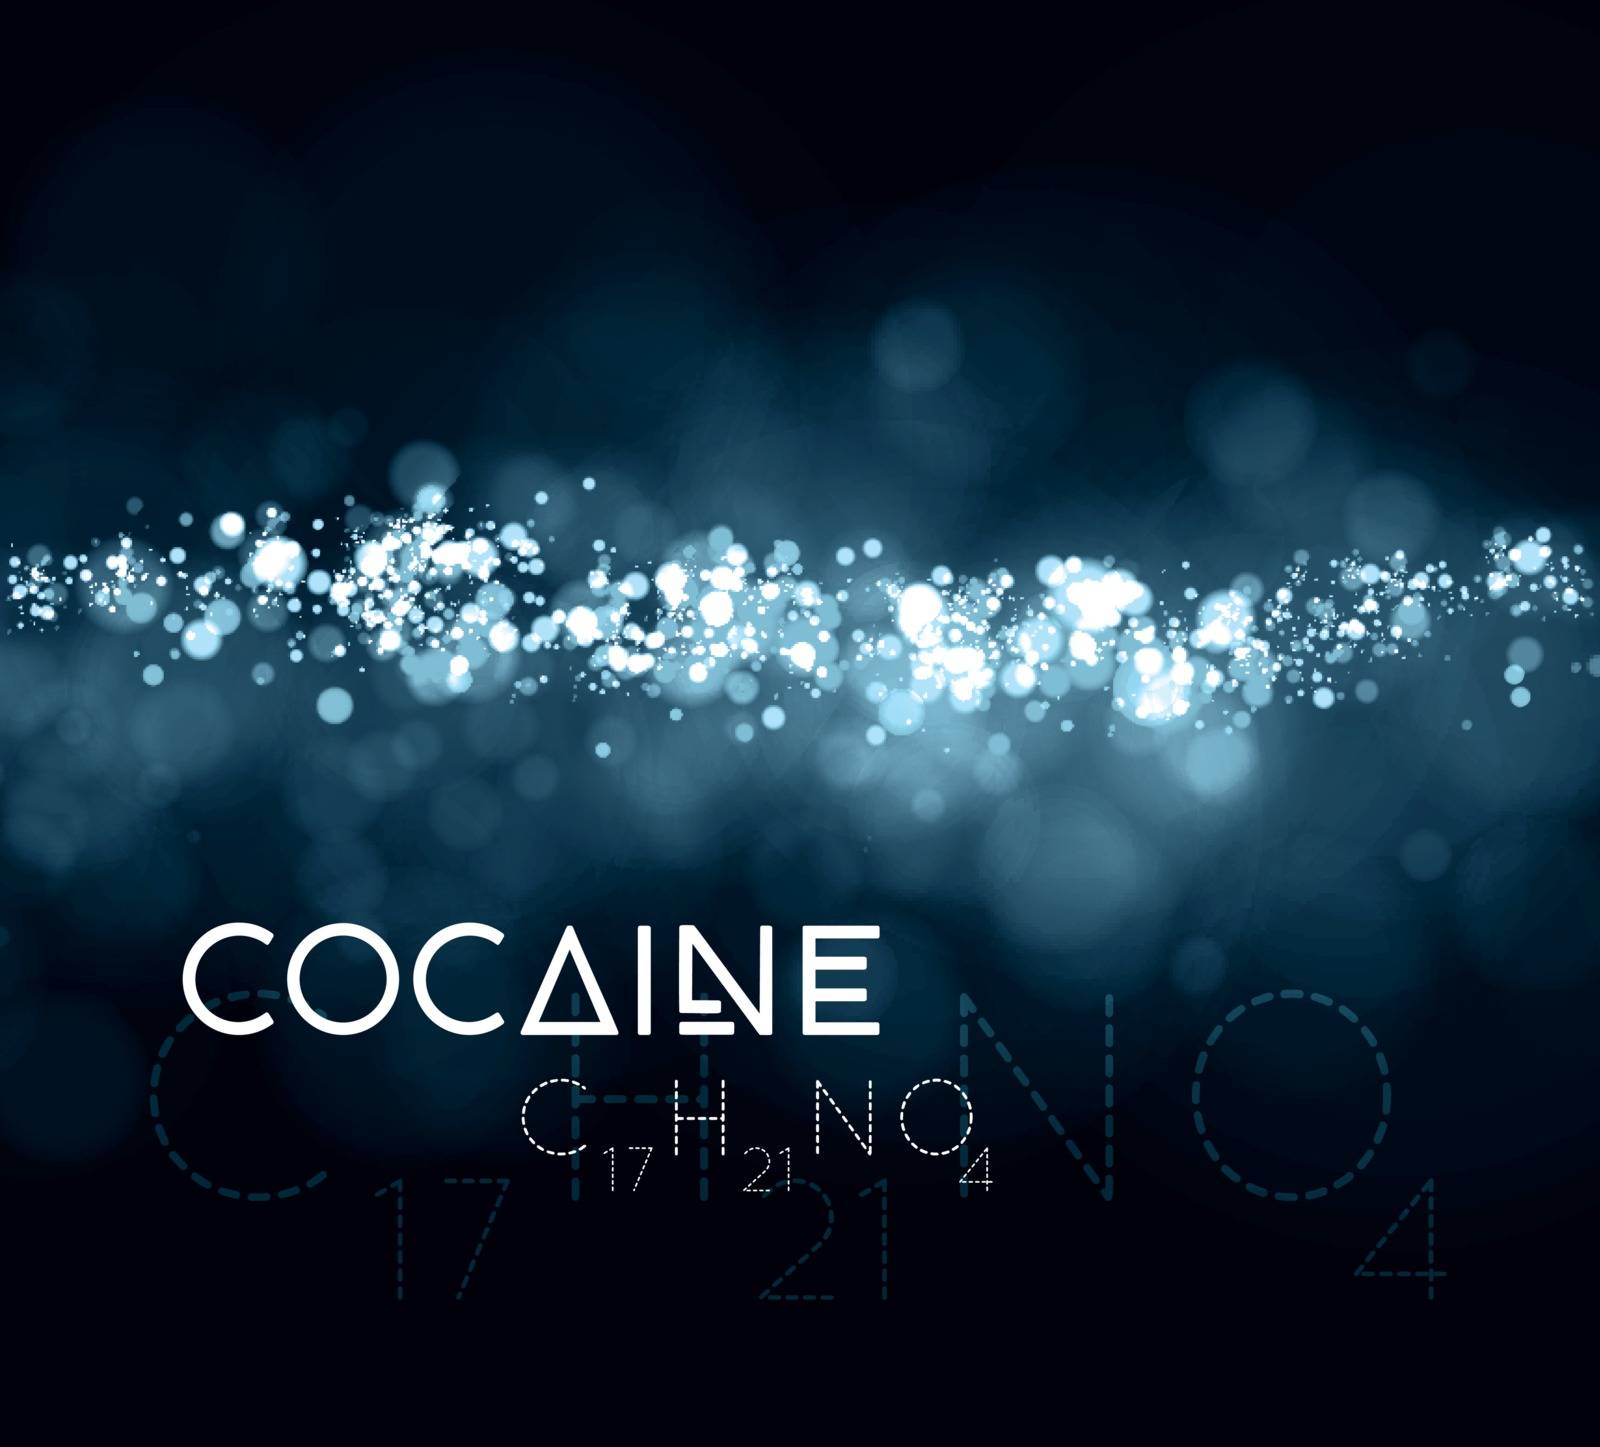 Cocaine powder with the chemical formula. Vector illustration